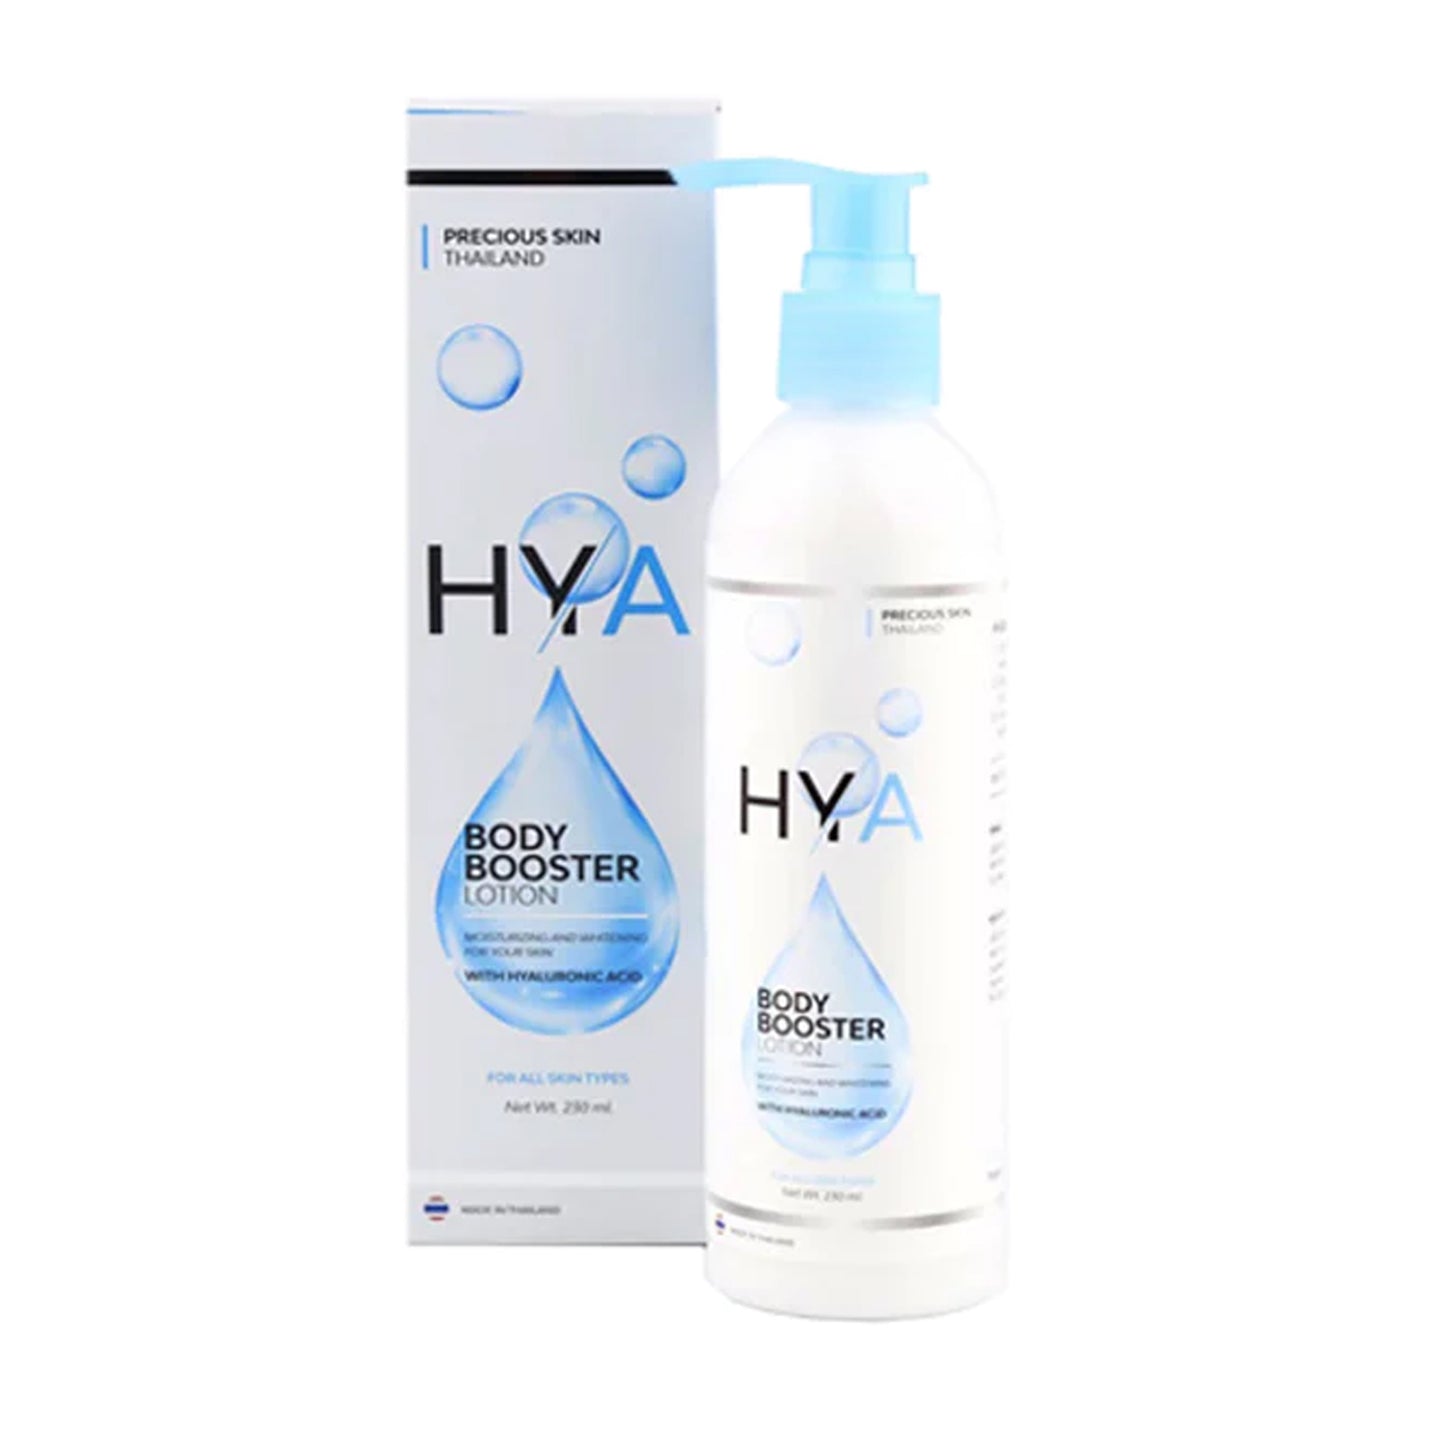 PRECIOUS SKIN THAILAND - HYA BODY BOOSTER LOTION WITH HYALURONIC ACID - 230ML